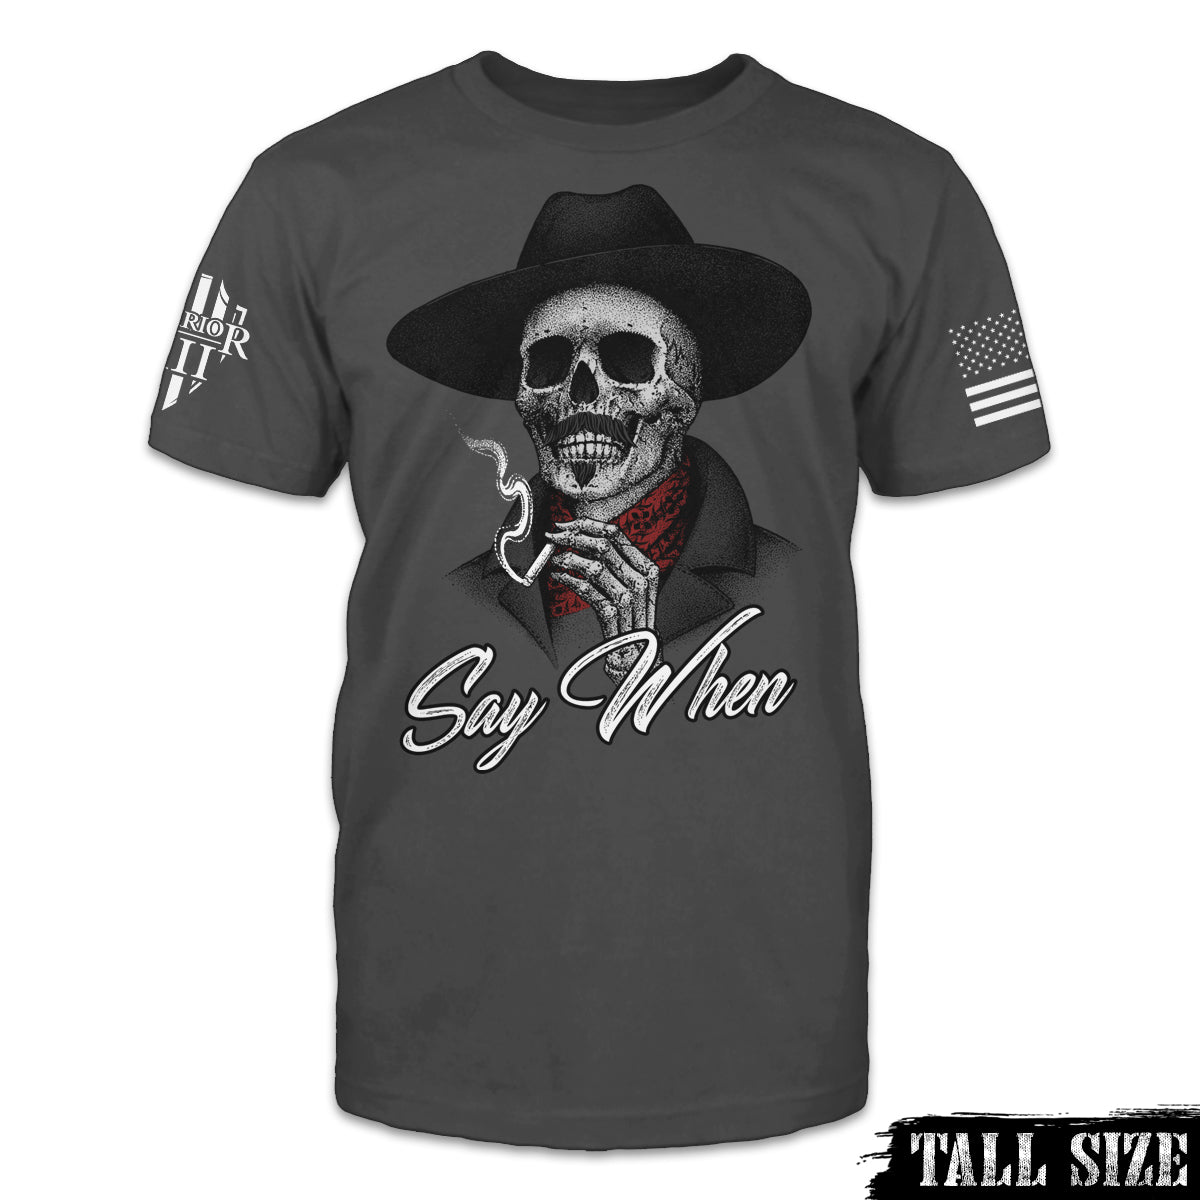 A dark grey tall size shirt with the words "Say When" with a skeleton smoking a cigarette printed on the front of the shirt.